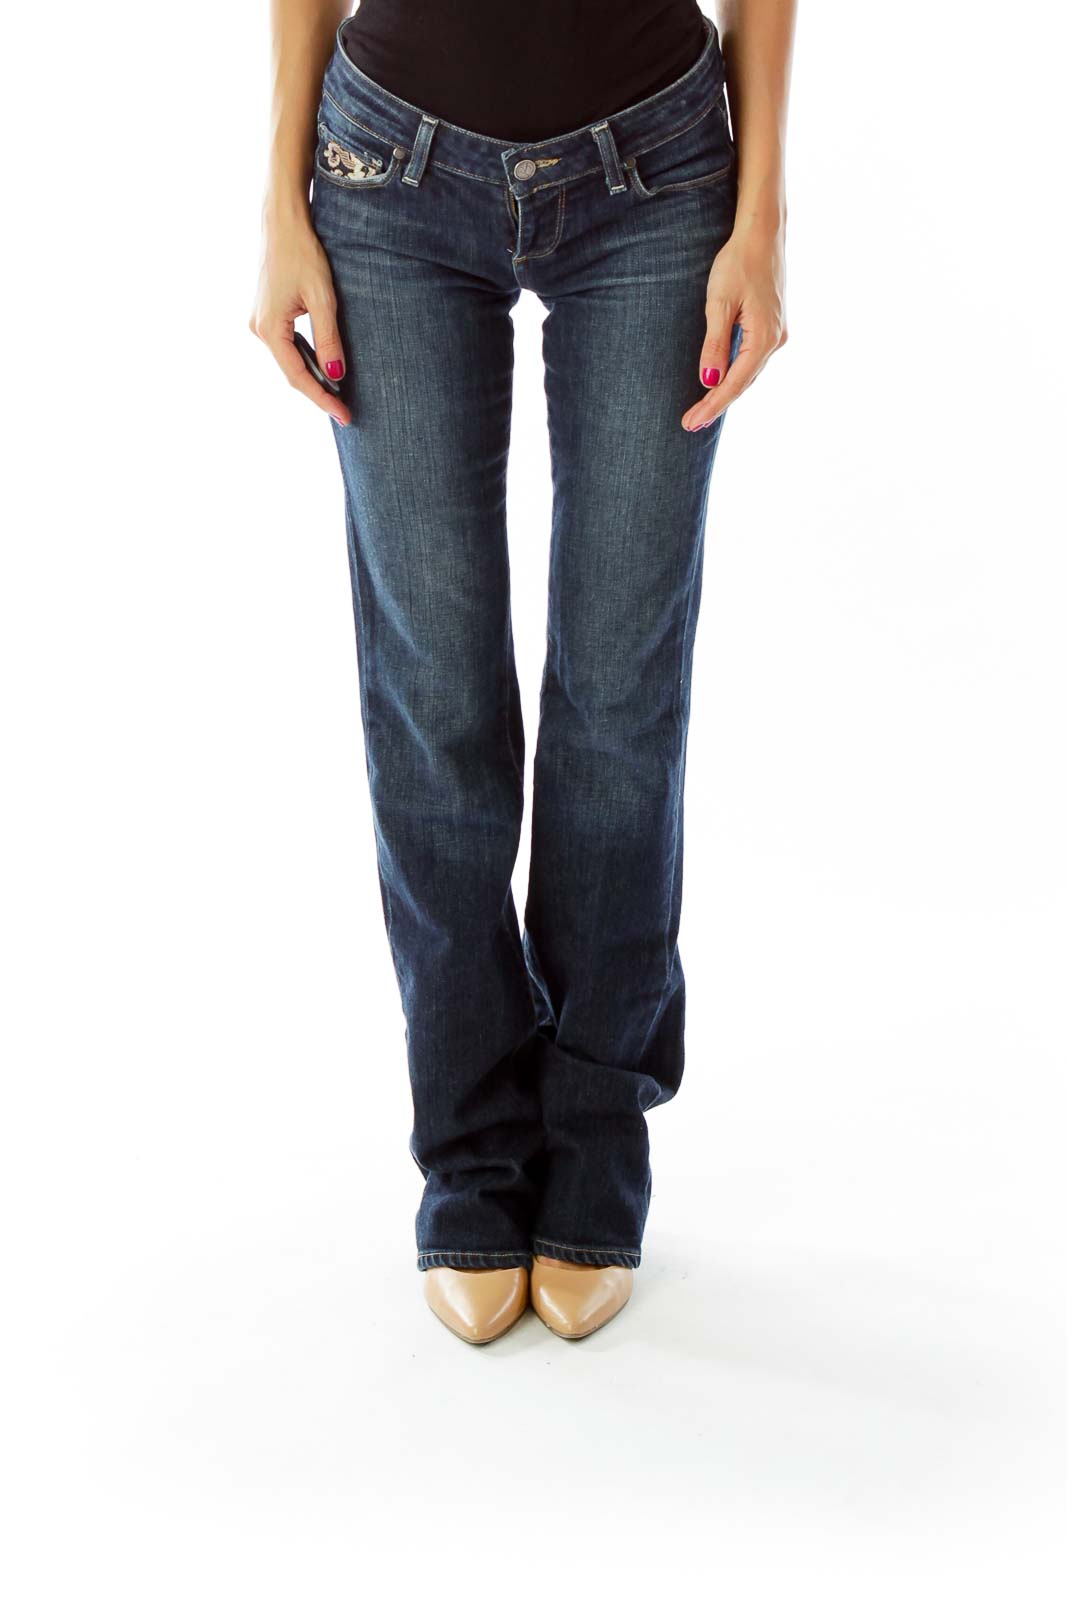 Paige - Navy Embroidered Wide-Leg Jeans Cotton Spandex | SilkRoll